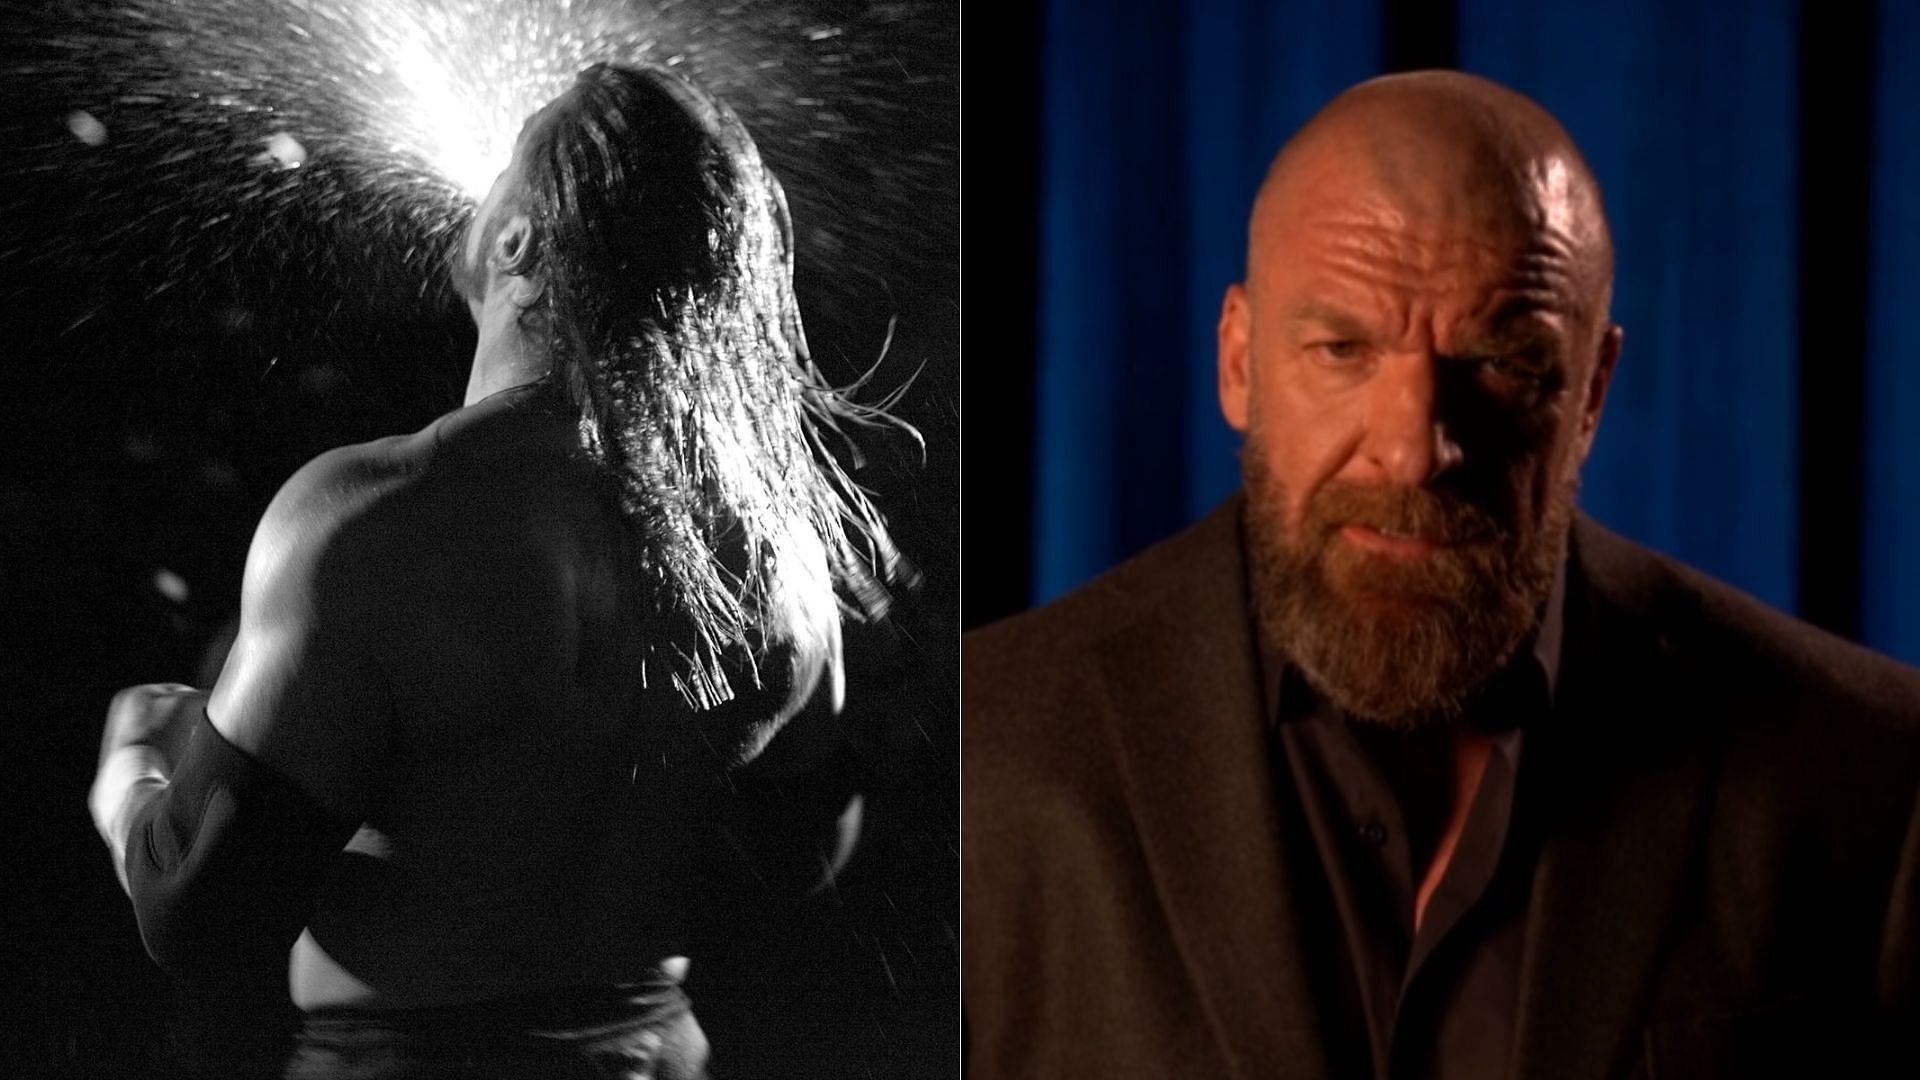 Triple H before (left) and after (right) his haircut in 2012.